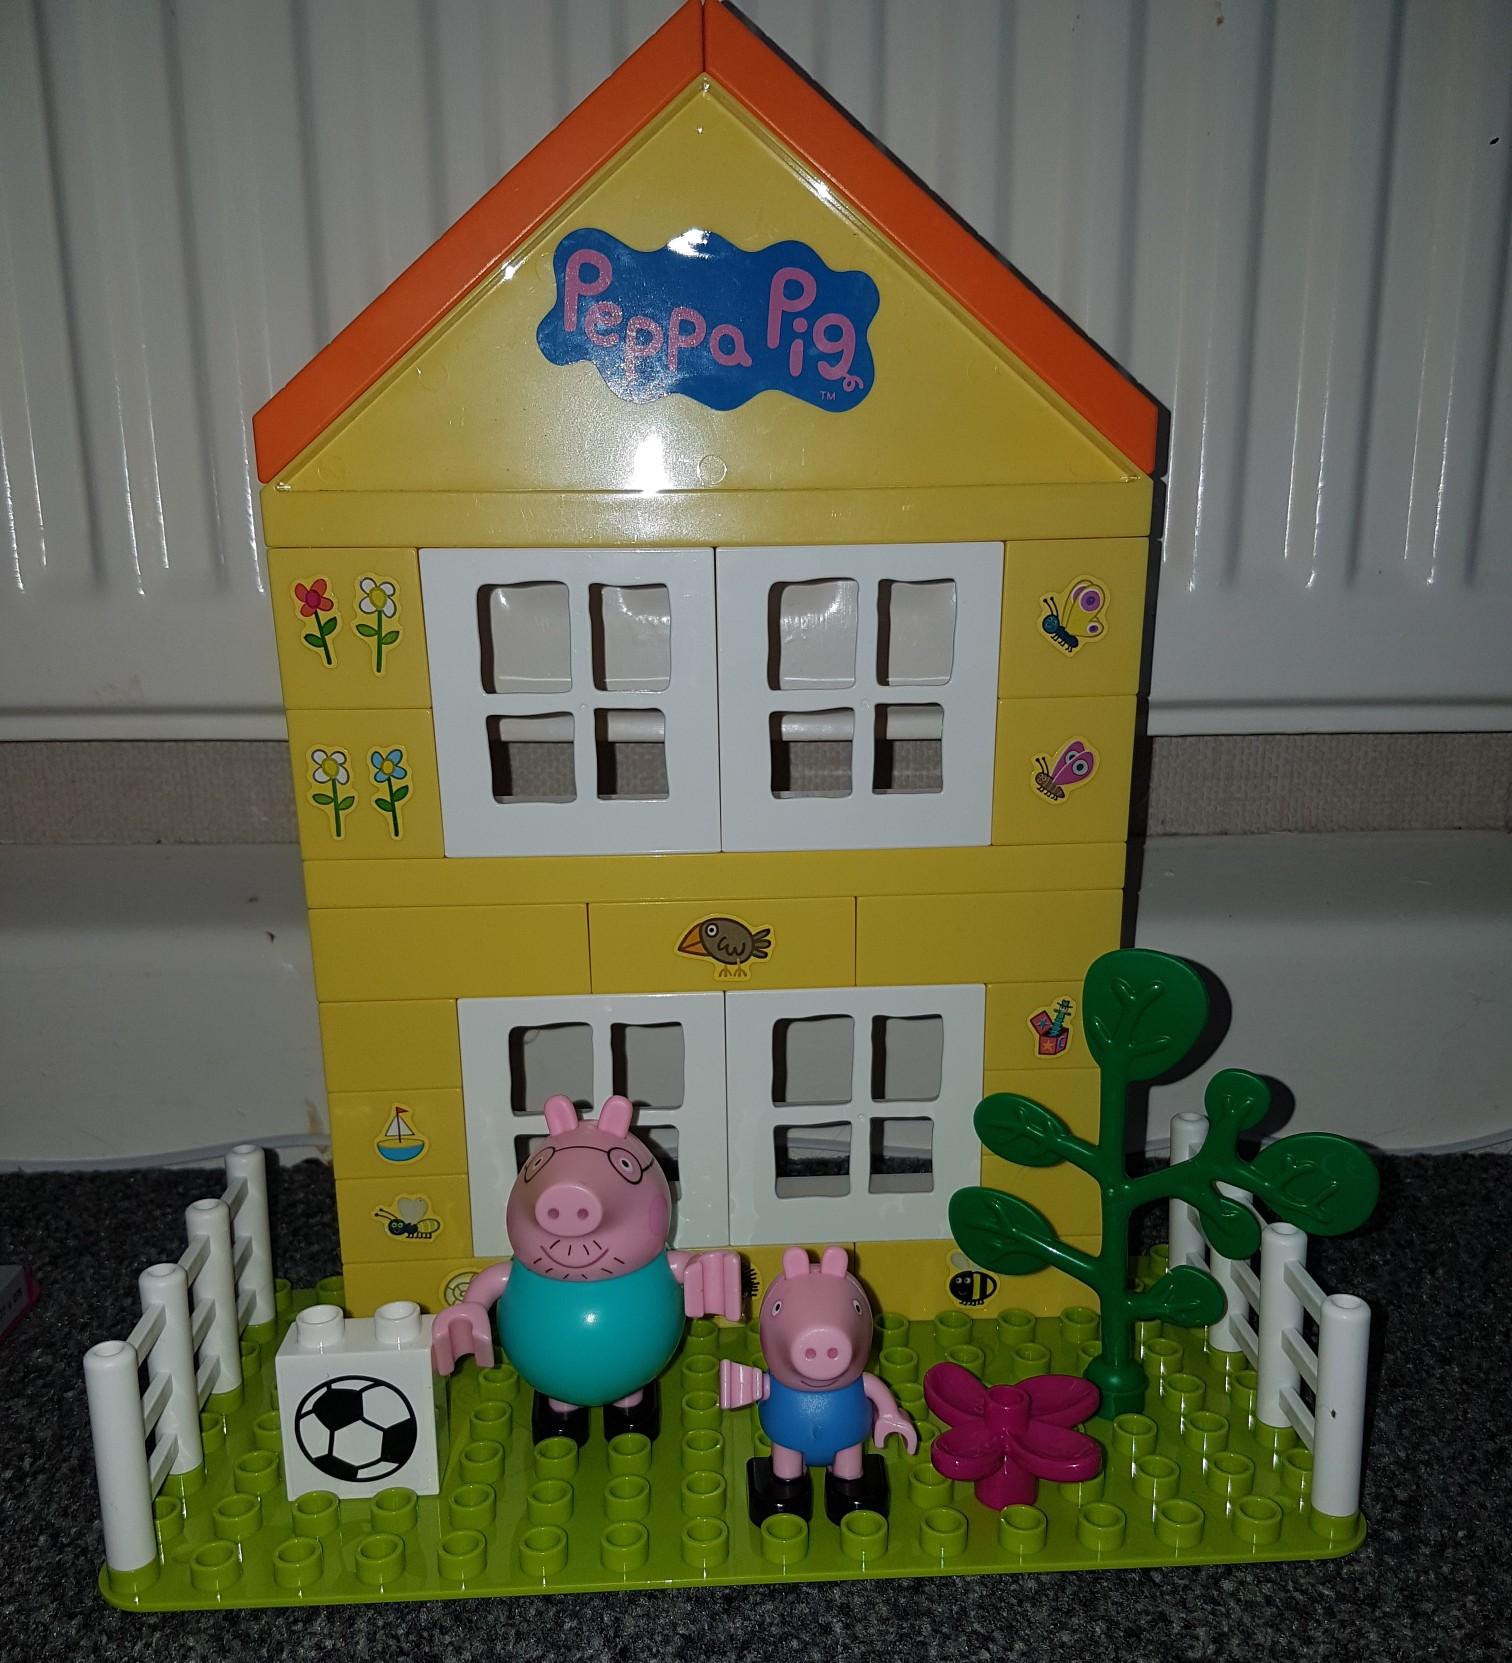 Peppa Pig Construction Lego Duplo In Wf1 Wakefield For 20 00 For Sale Shpock